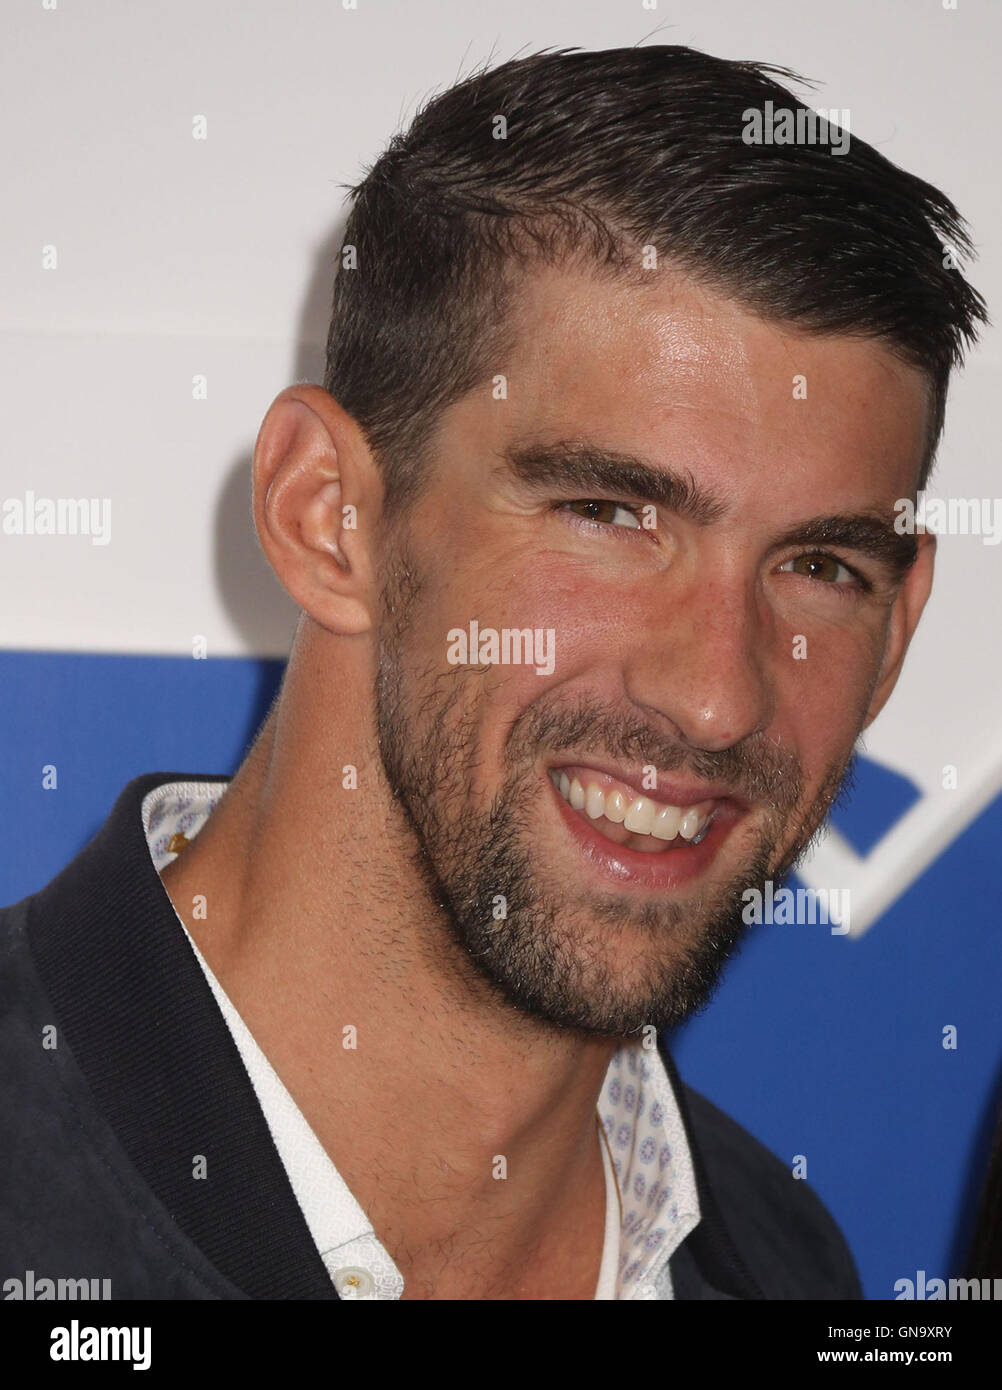 New York New York Usa 28th Aug 2016 Olympic Swimmer Michael Phelps Attends The Arrivals At